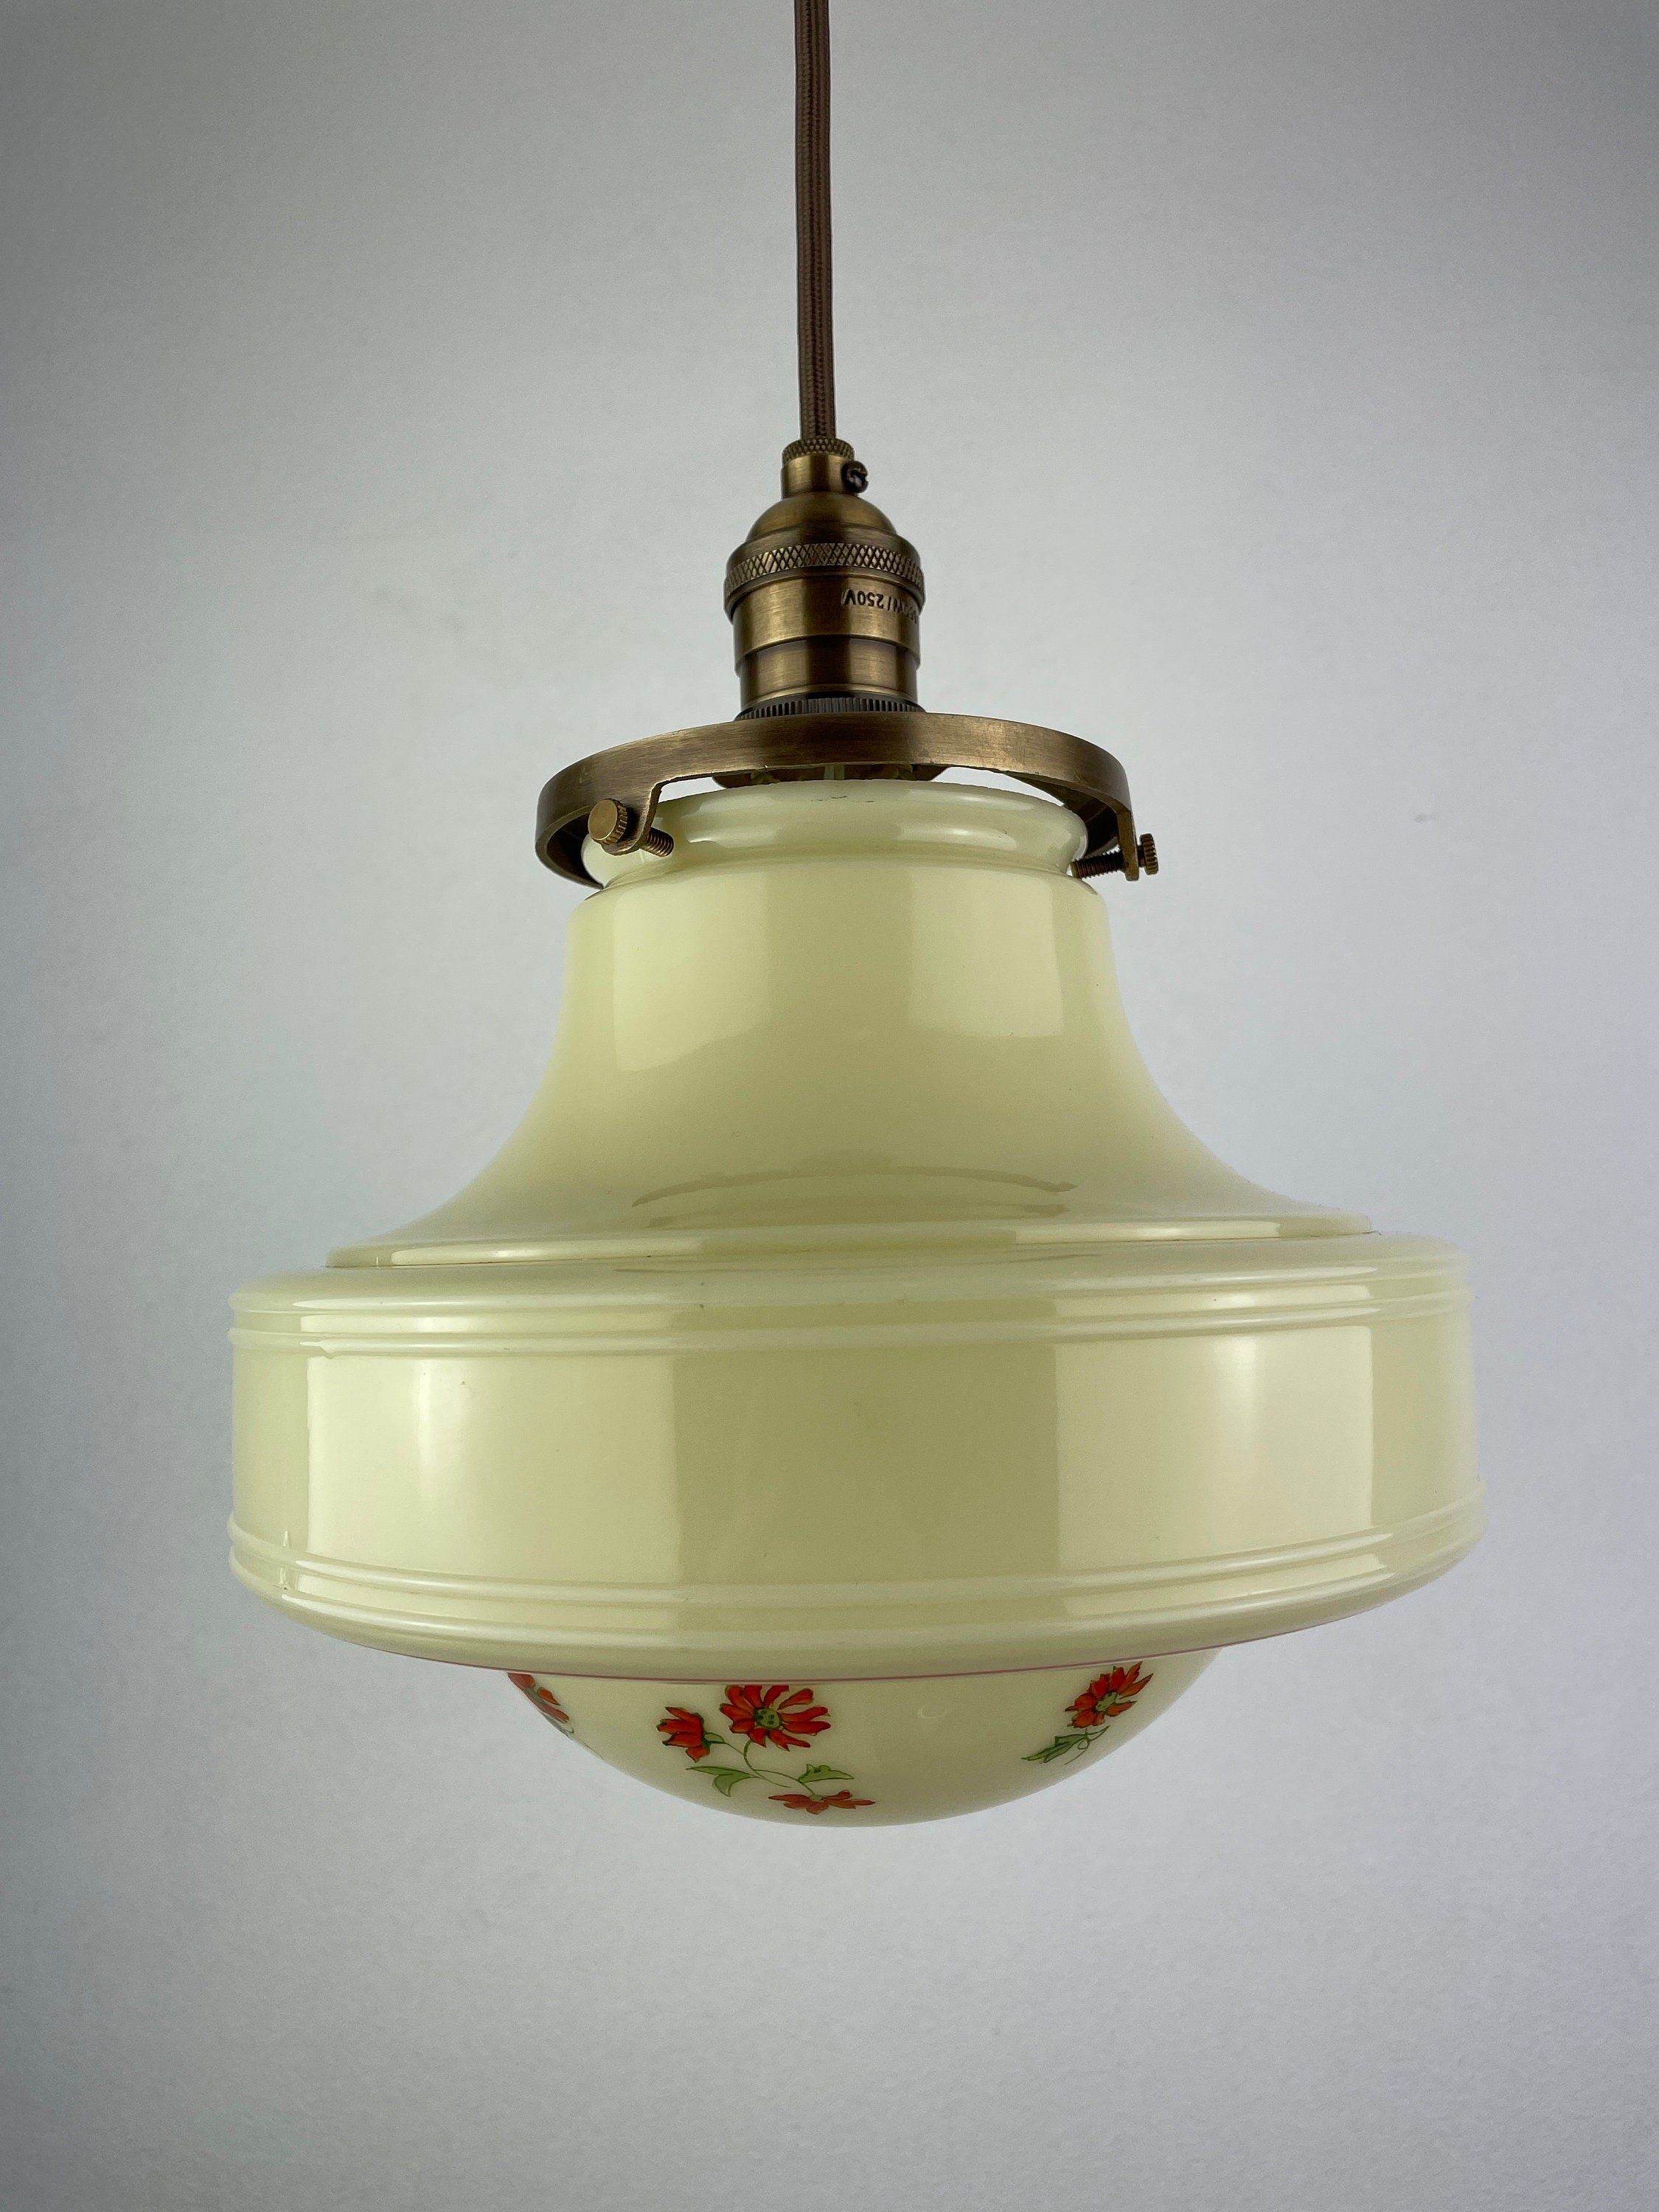 Beautiful Antique 1920's Custard Shade with Hand Painted Green & Red Flowers with Antique Brass Hardware